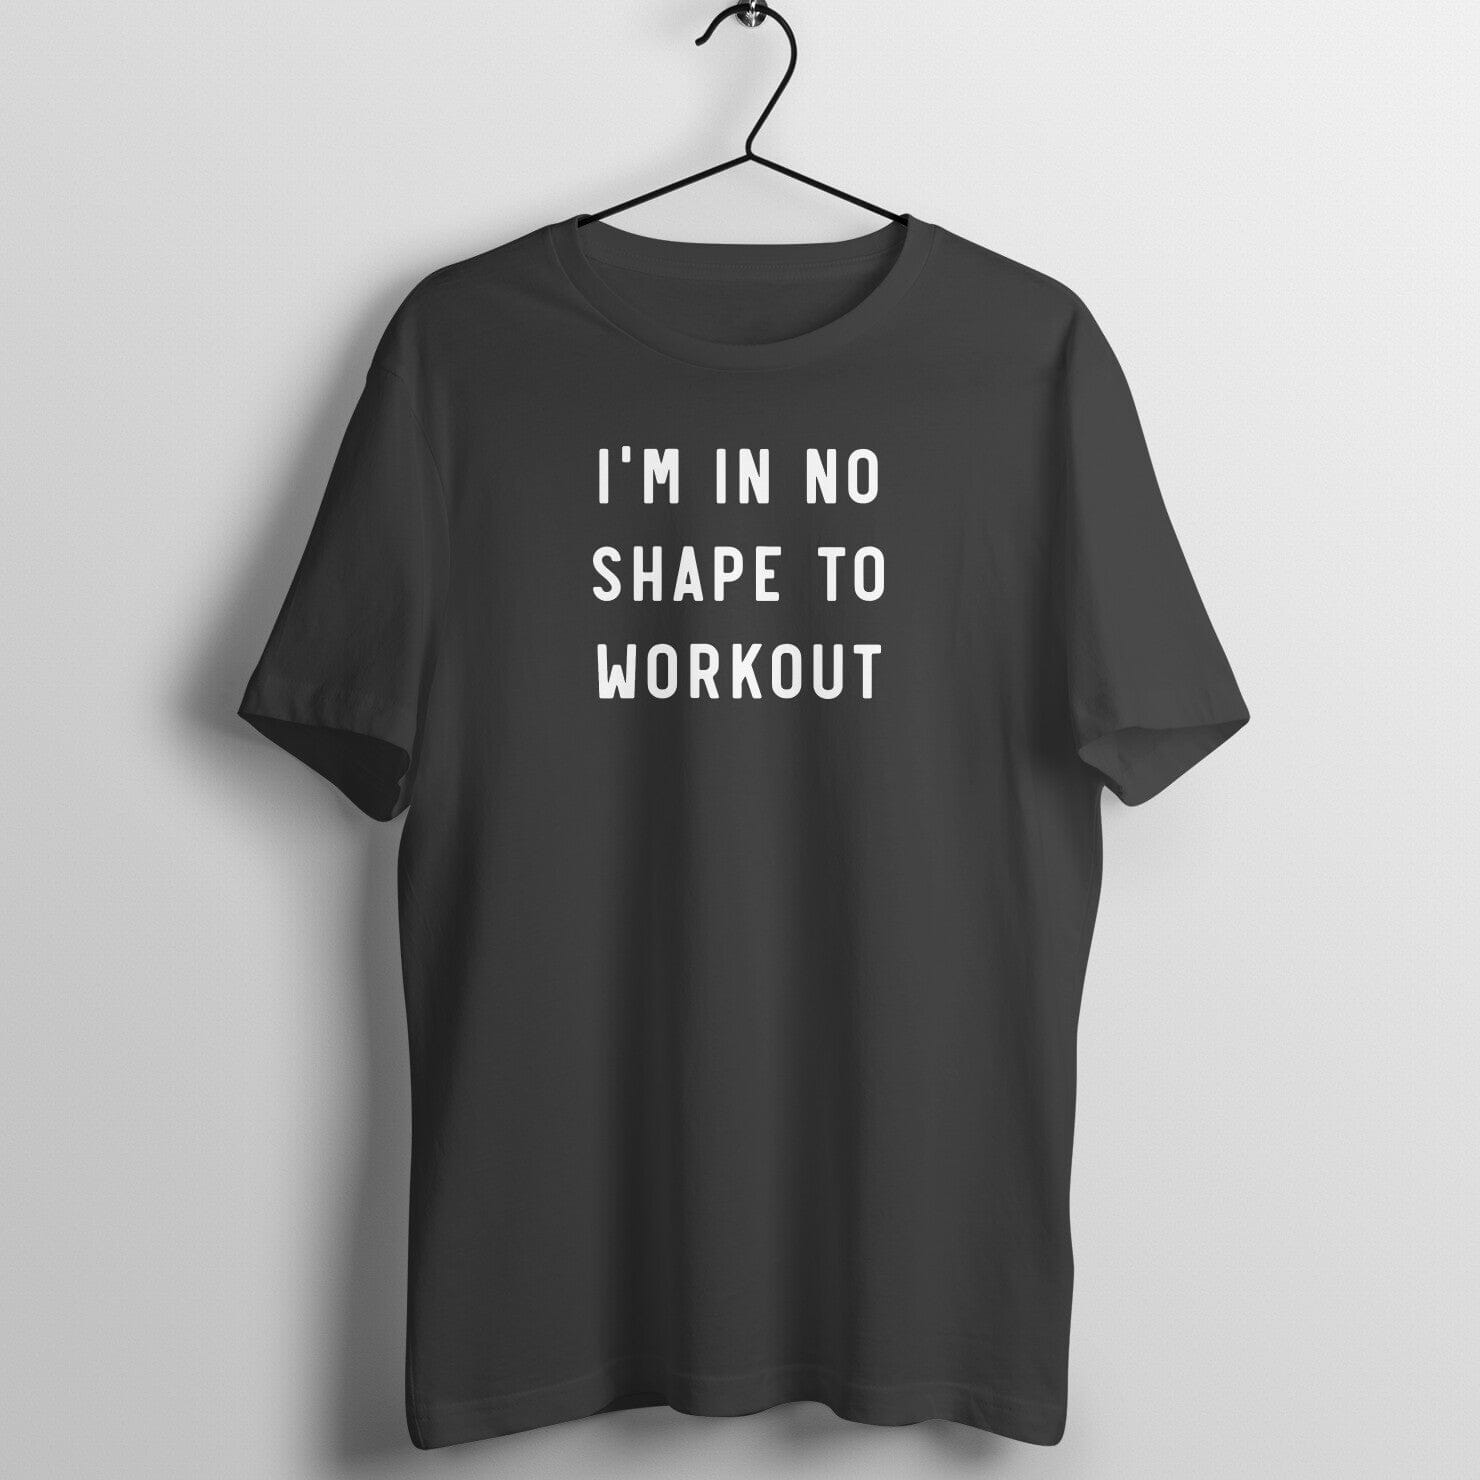 i'm in No Shape to Workout Funny Black T Shirt for Men and Women Printrove Black S 